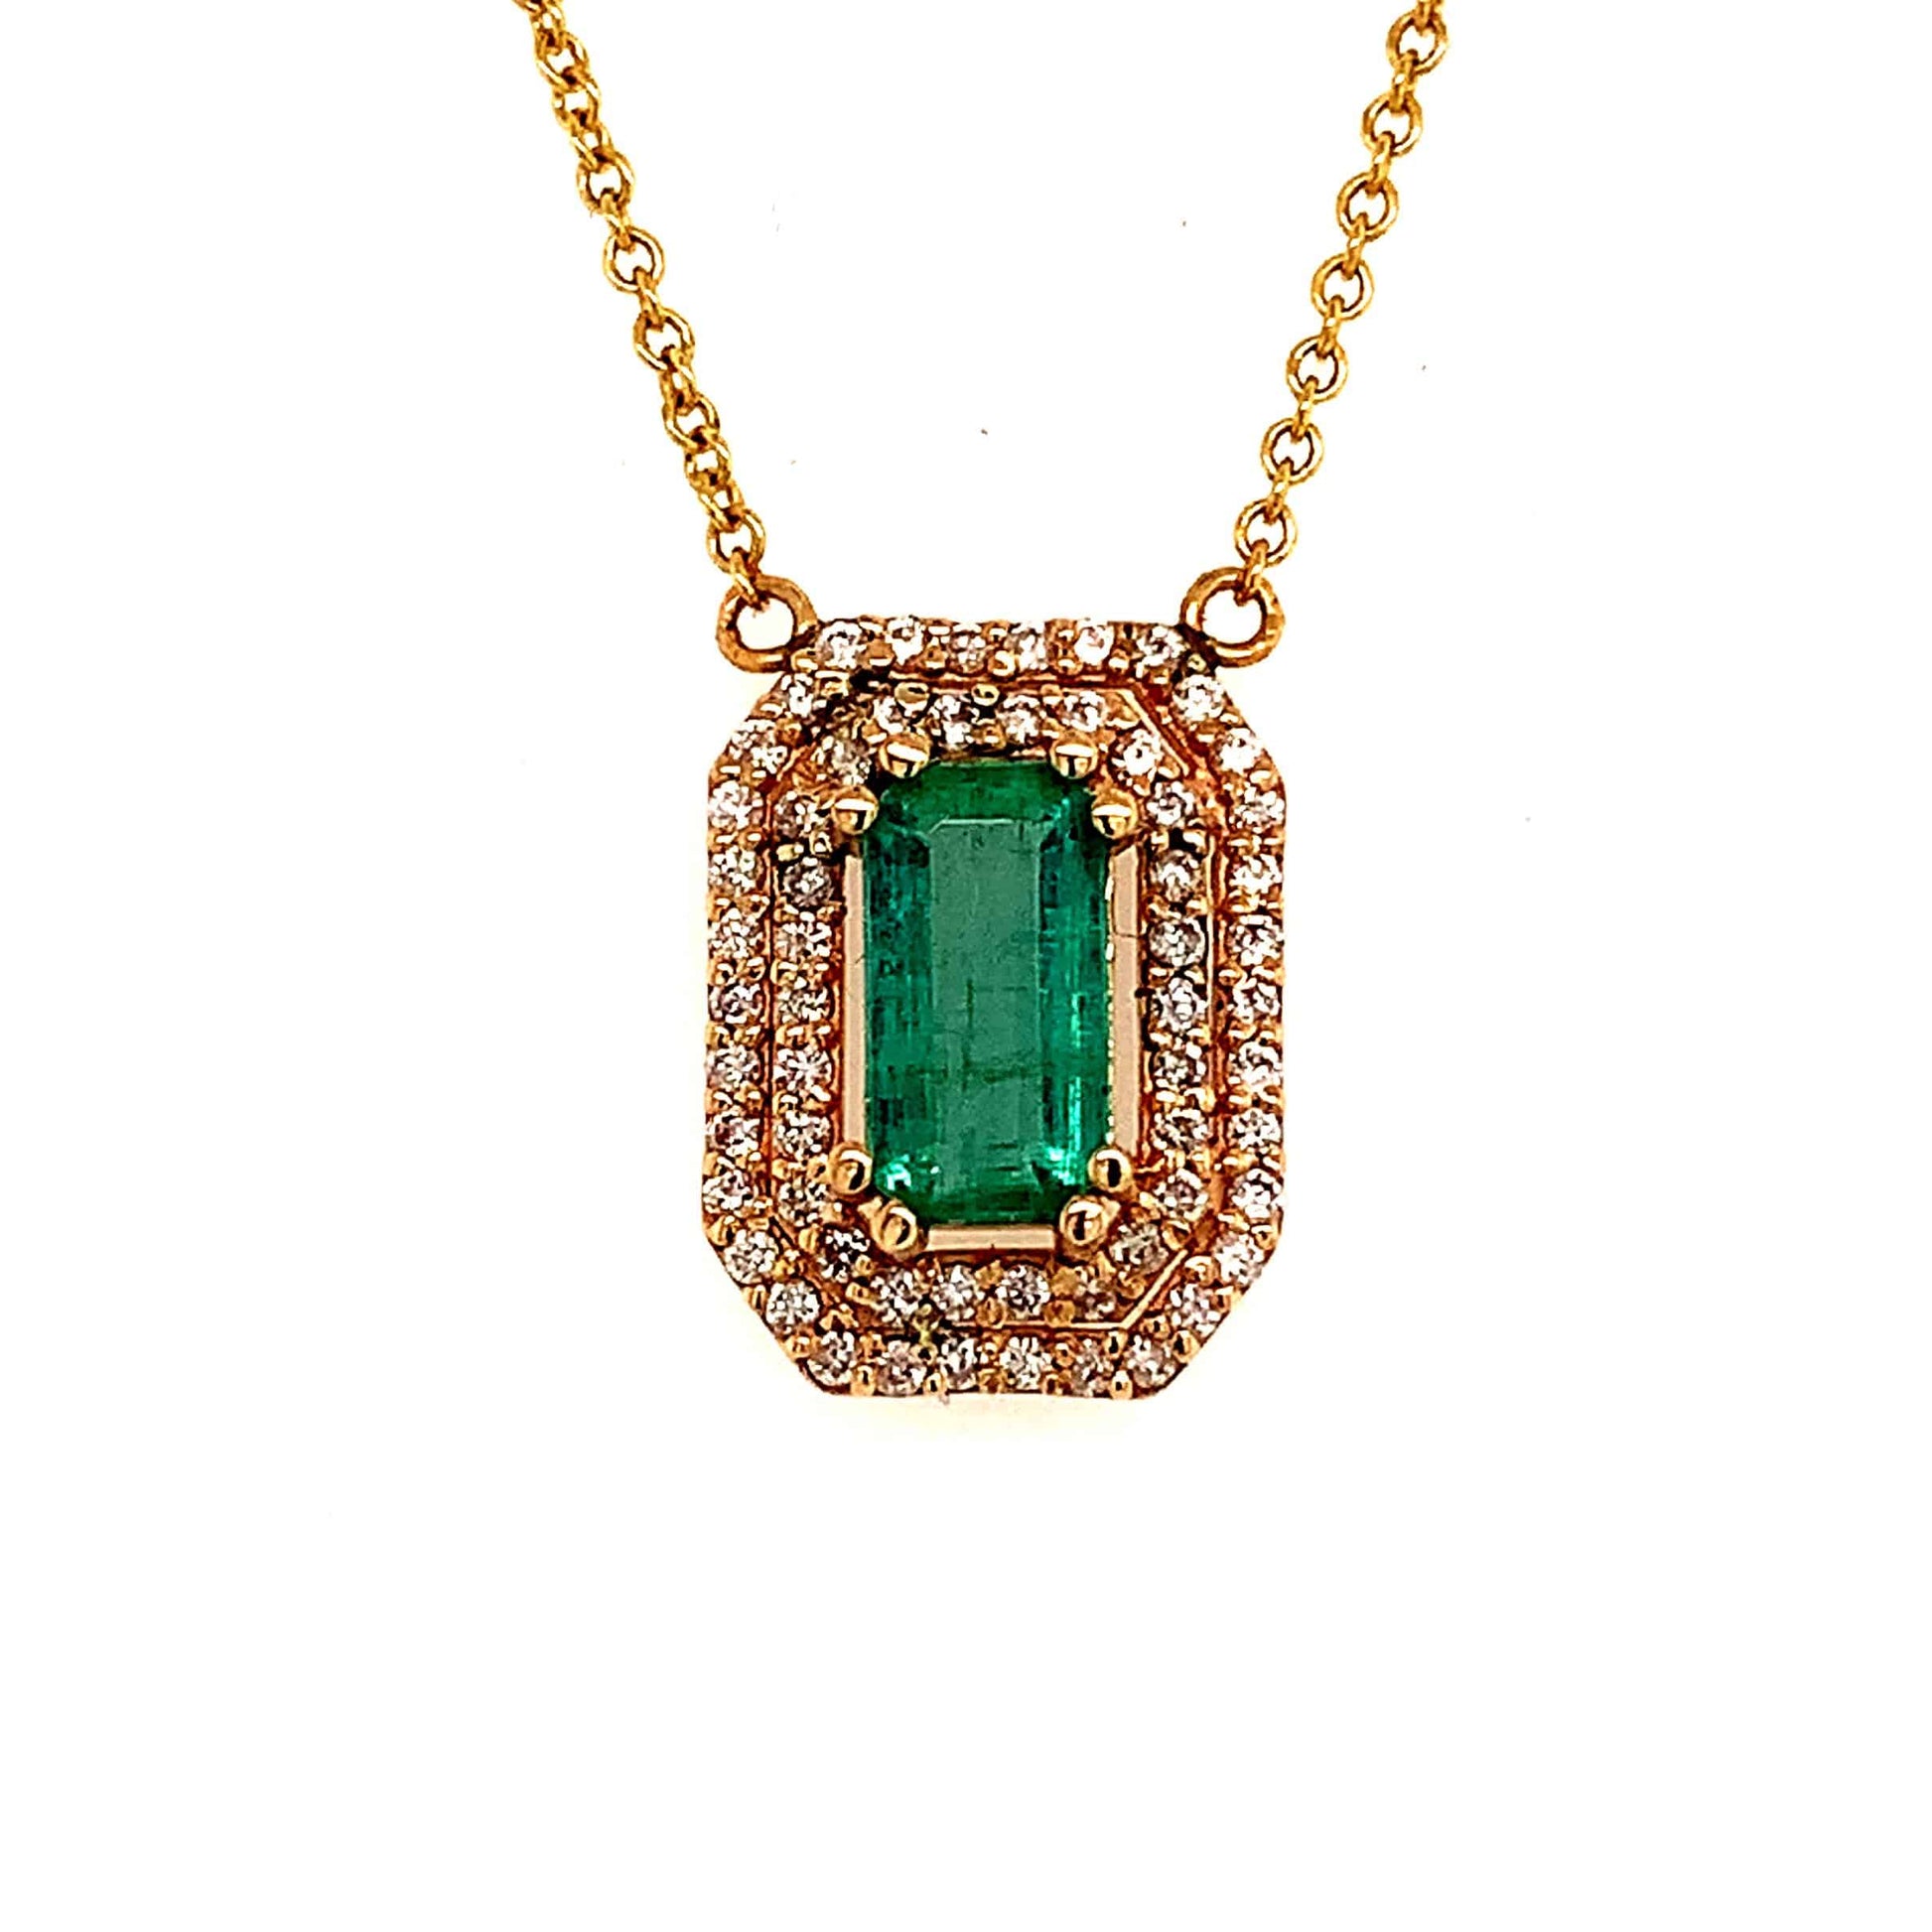 Natural Emerald Diamond Necklace 14k Gold 1.21 TCW 16" Certified $4,950 112176 - Certified Fine Jewelry